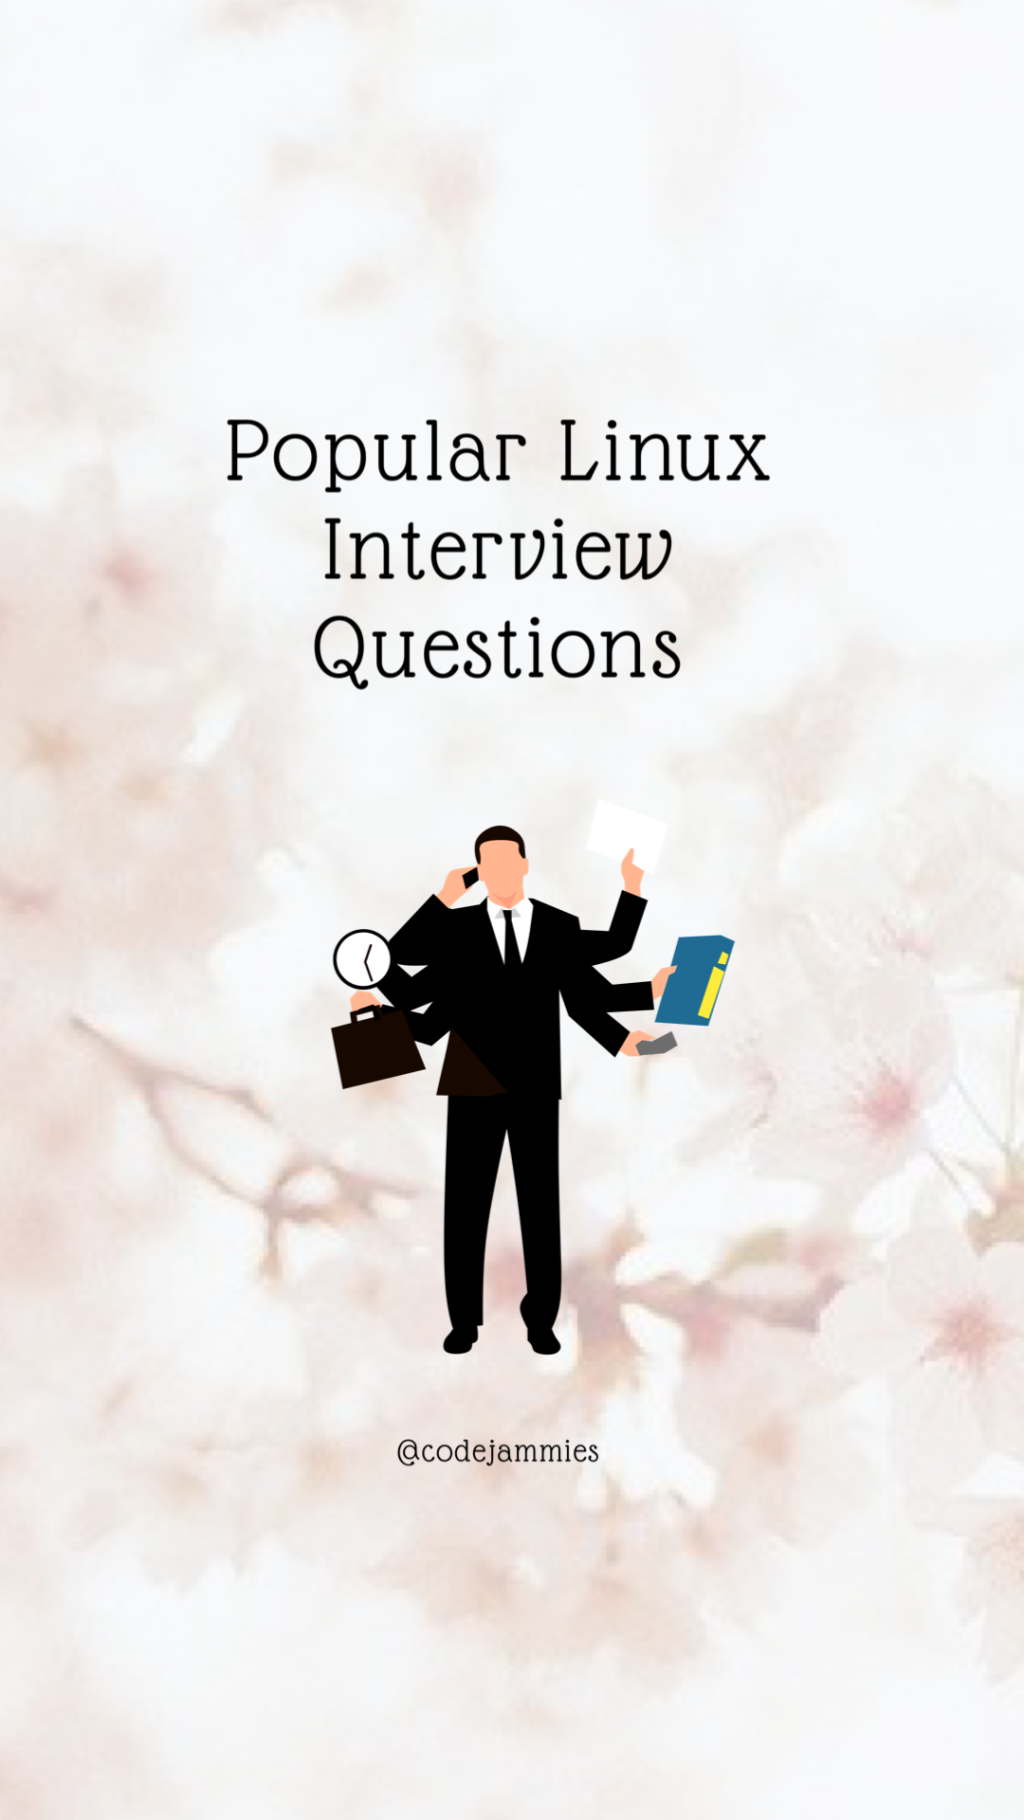 Popular Linux Interview Questions